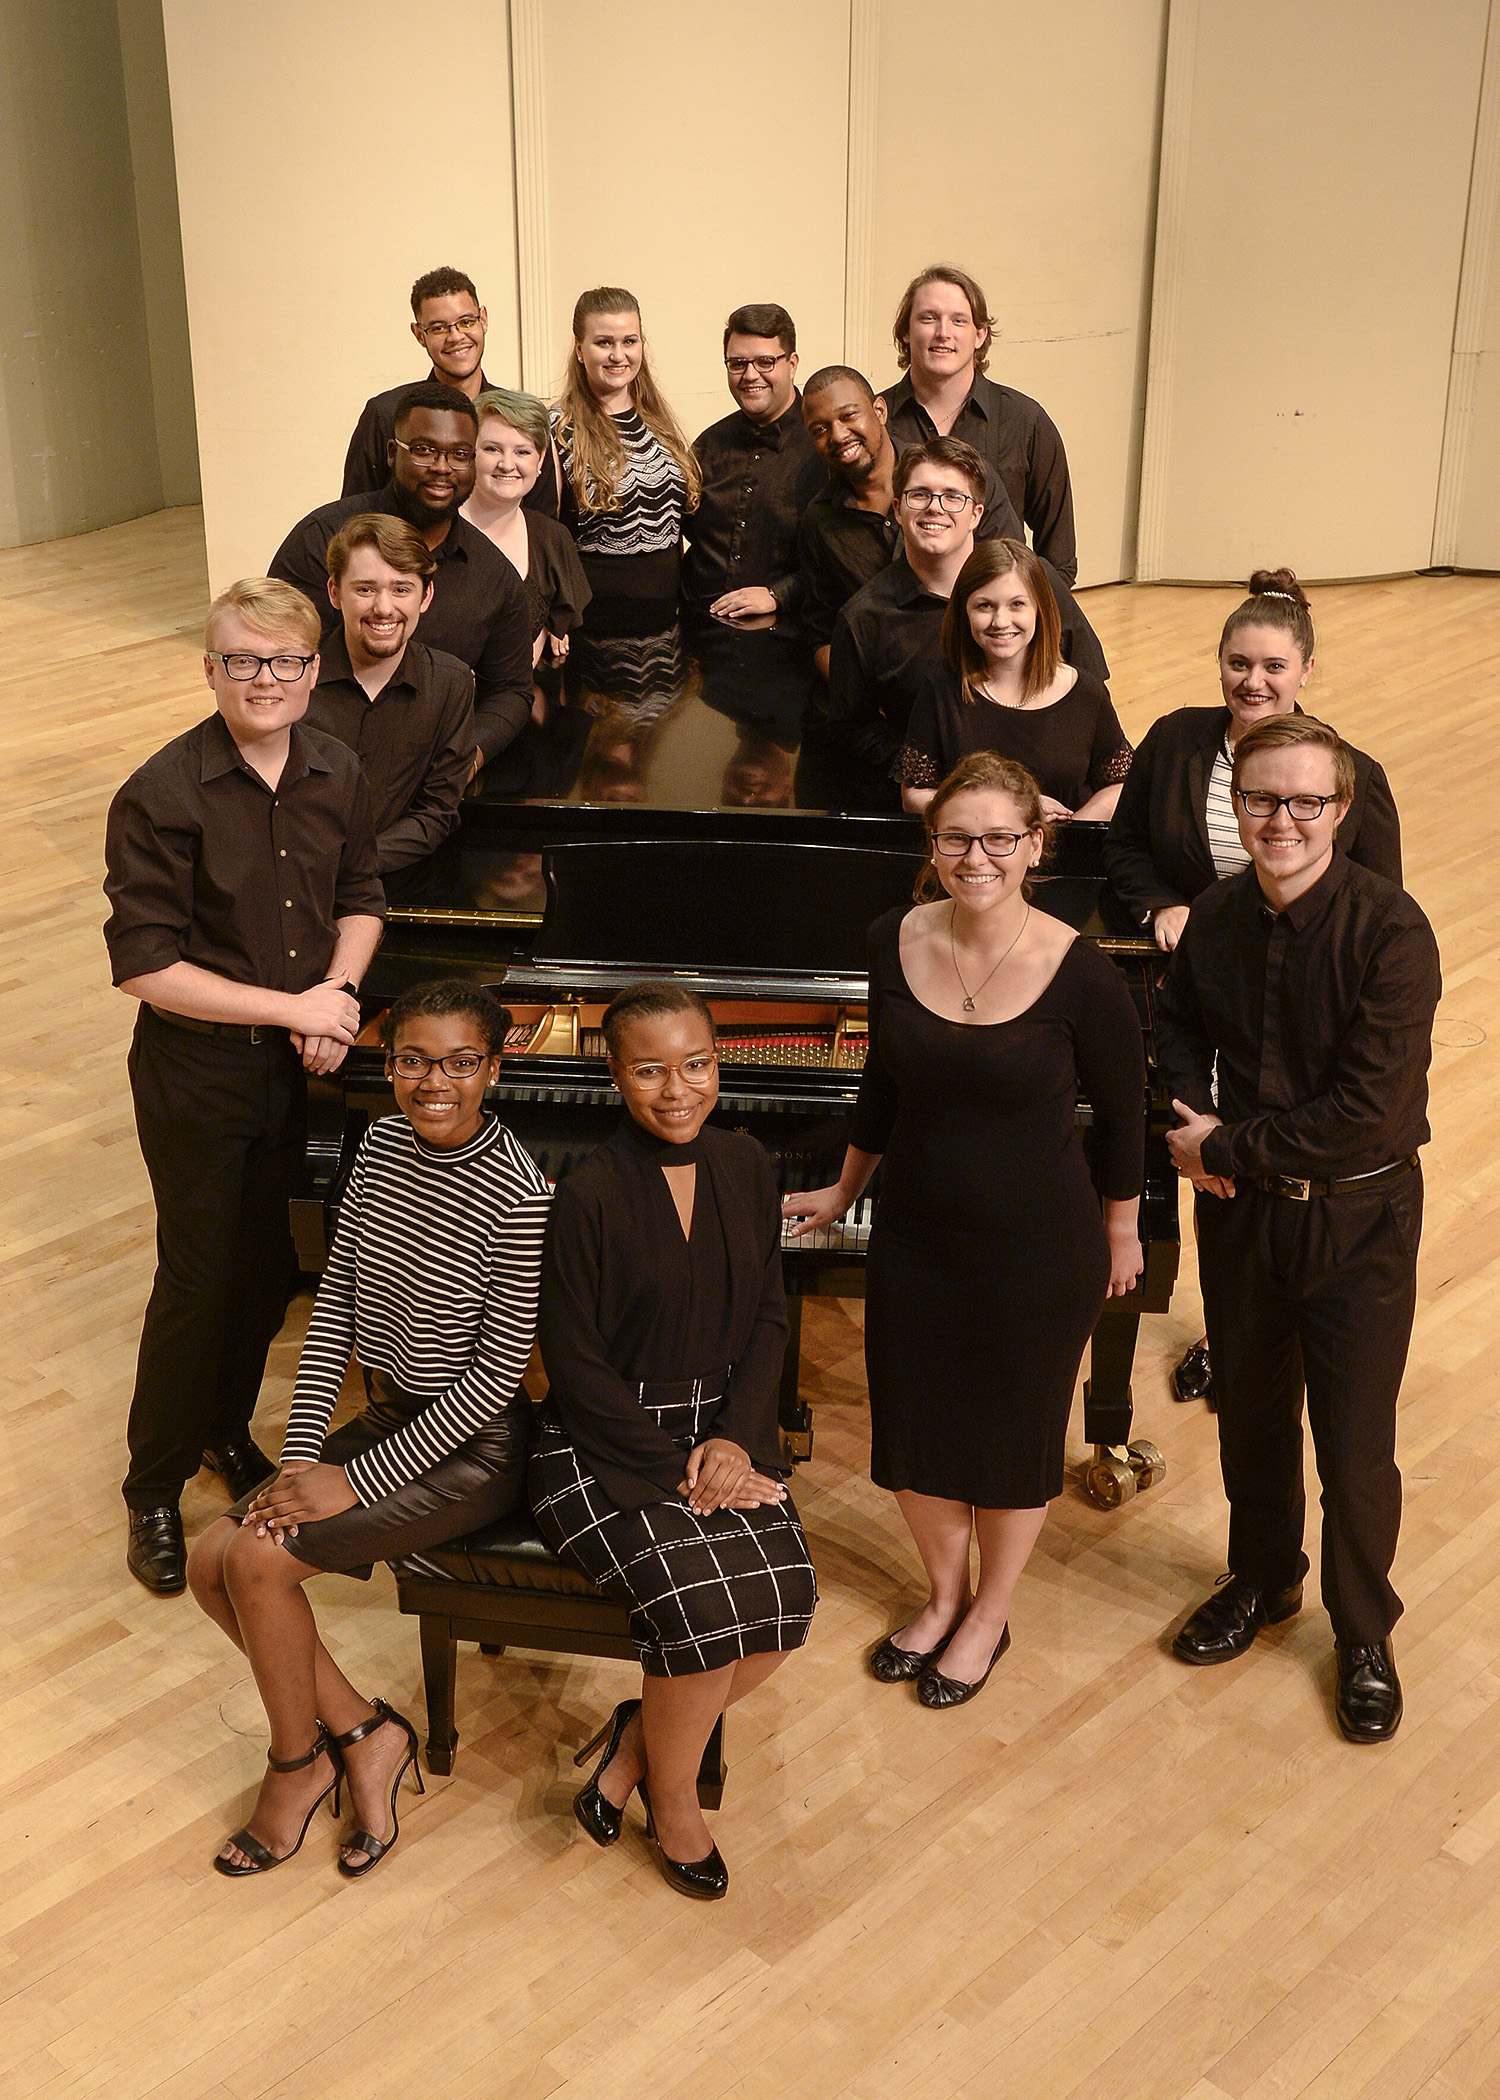 SFA' Madrigal Singers will perform at 7:30 p.m. Thursday, Nov. 2, in Cole Concert Hall on the SFA campus.